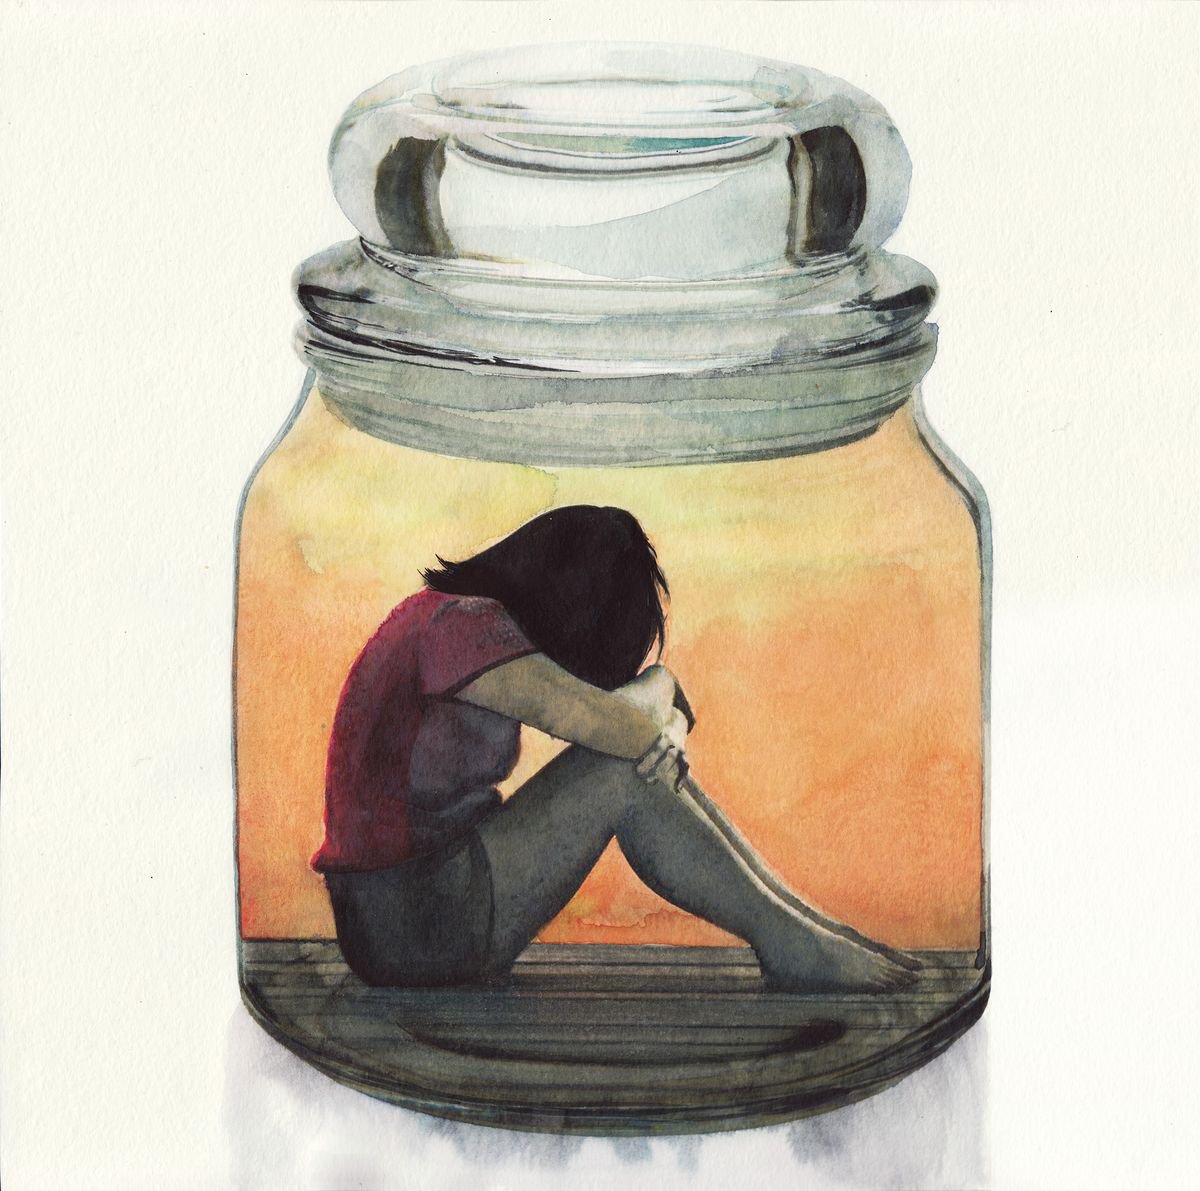 An Girl on the beach in a Jar IV by REME Jr.